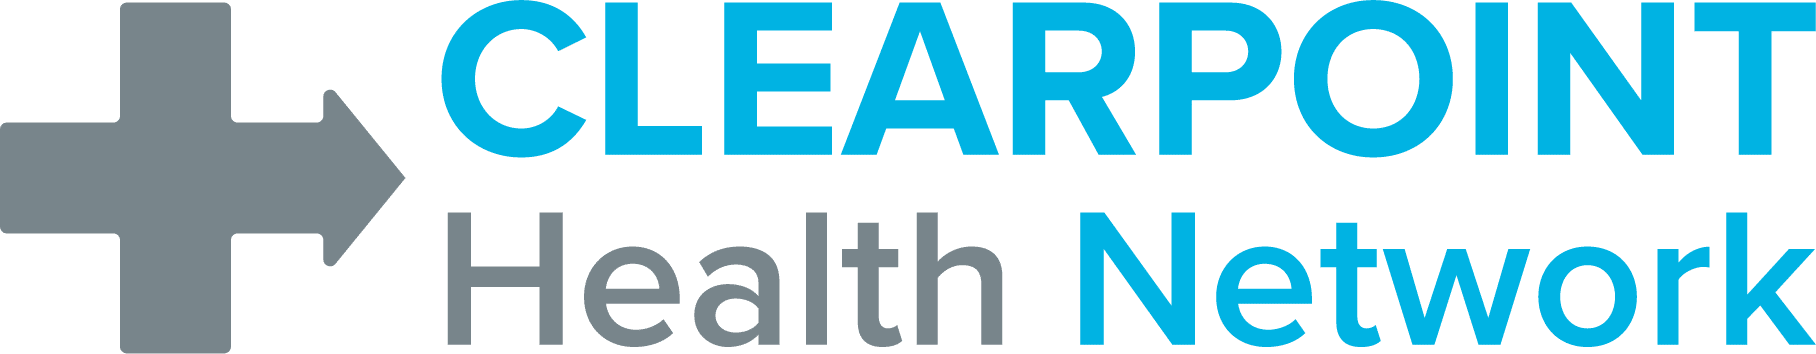 Clearpoint Health Network